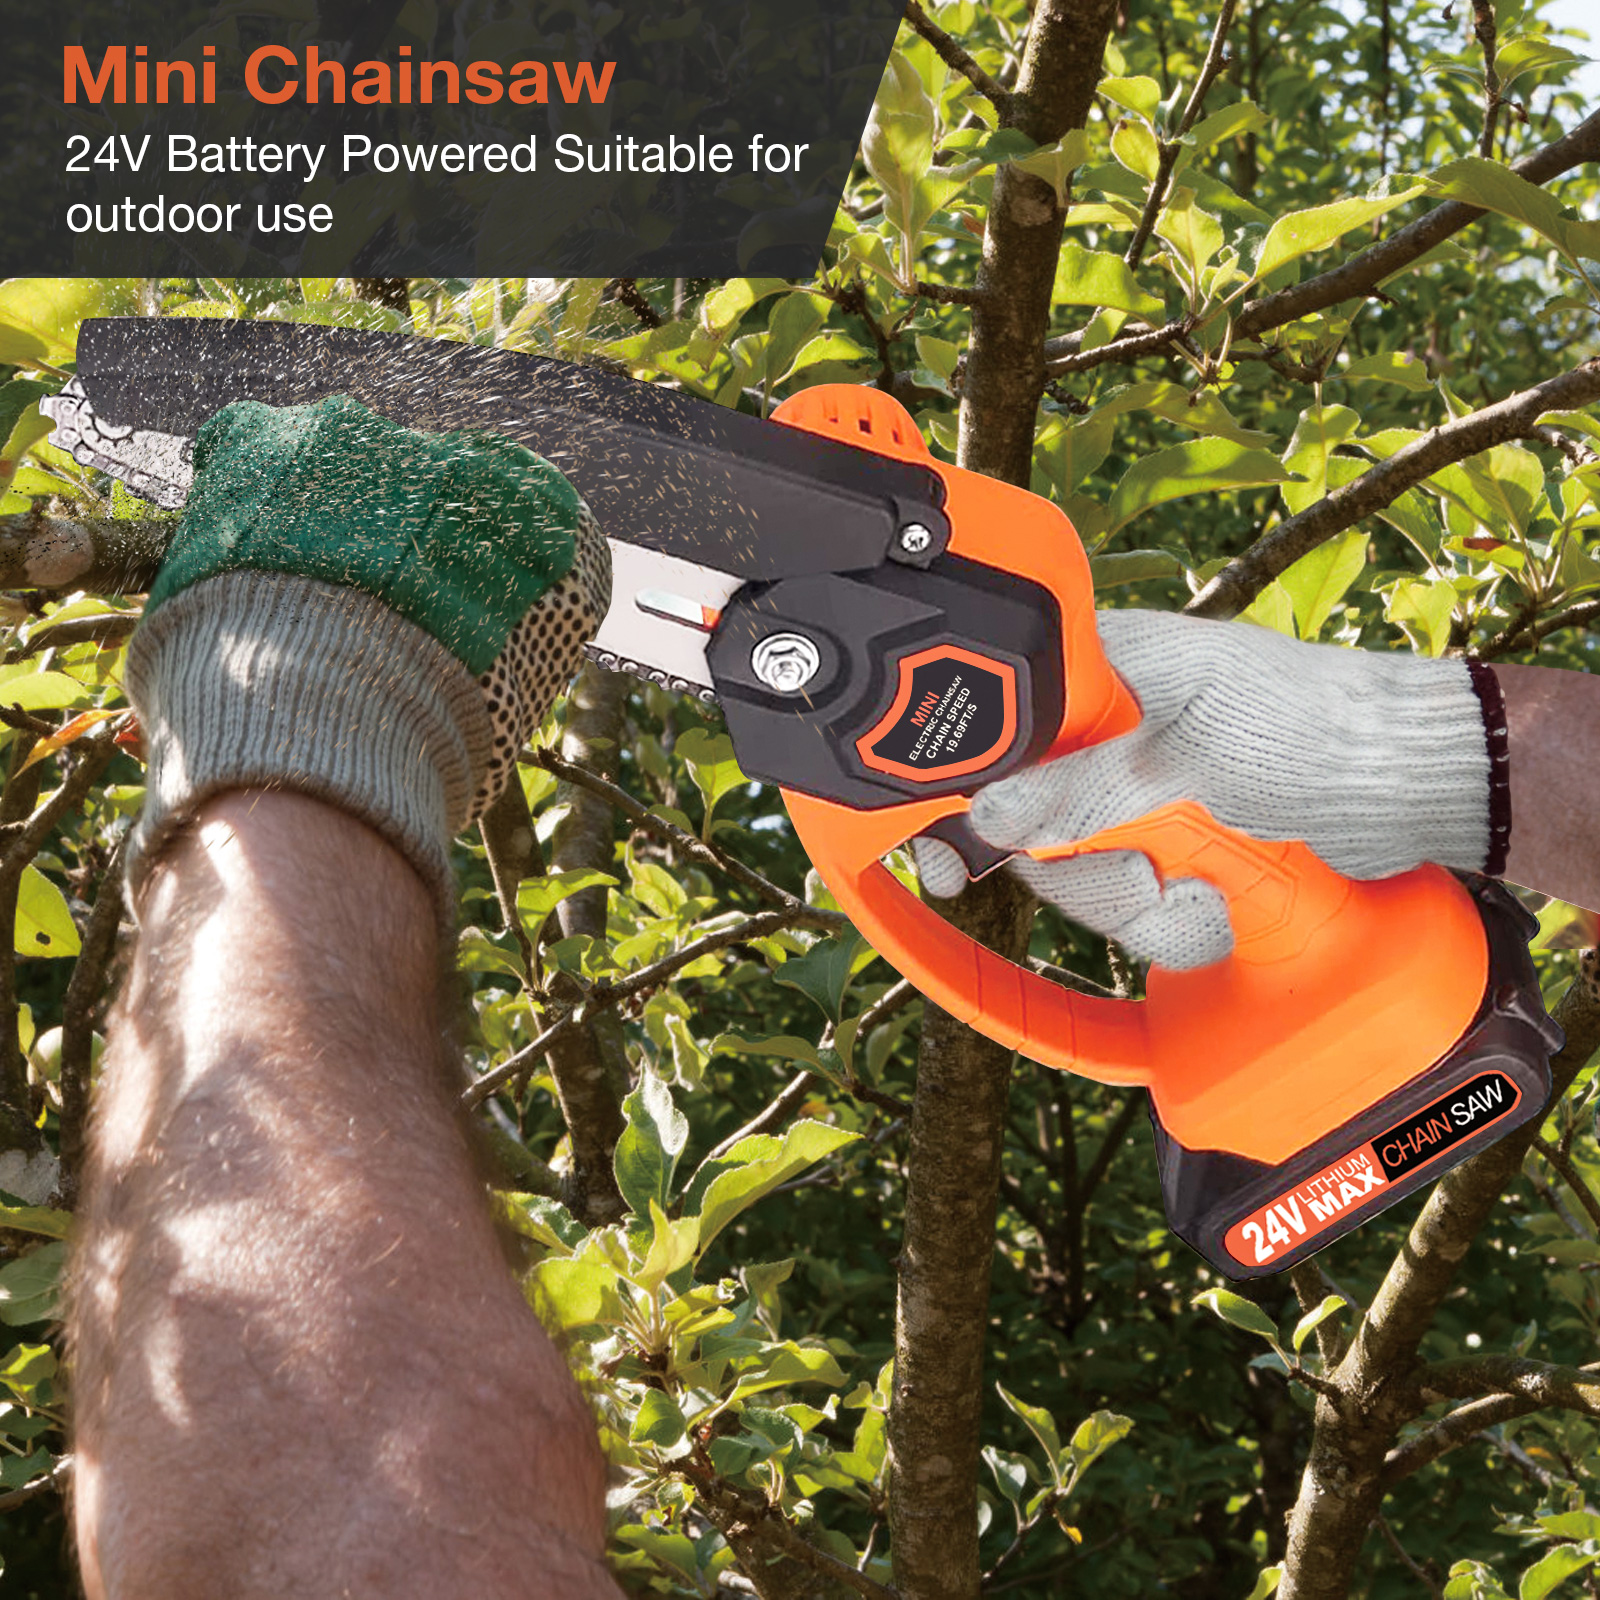 NEXPOW 6" Mini Chainsaw 24V Battery Powered Chainsaw ,with Safety Lock,with 2 Batteries 2 Chains, 6-inch Cordless Handheld Chain Saw Wood Cutter,Orange - image 2 of 8